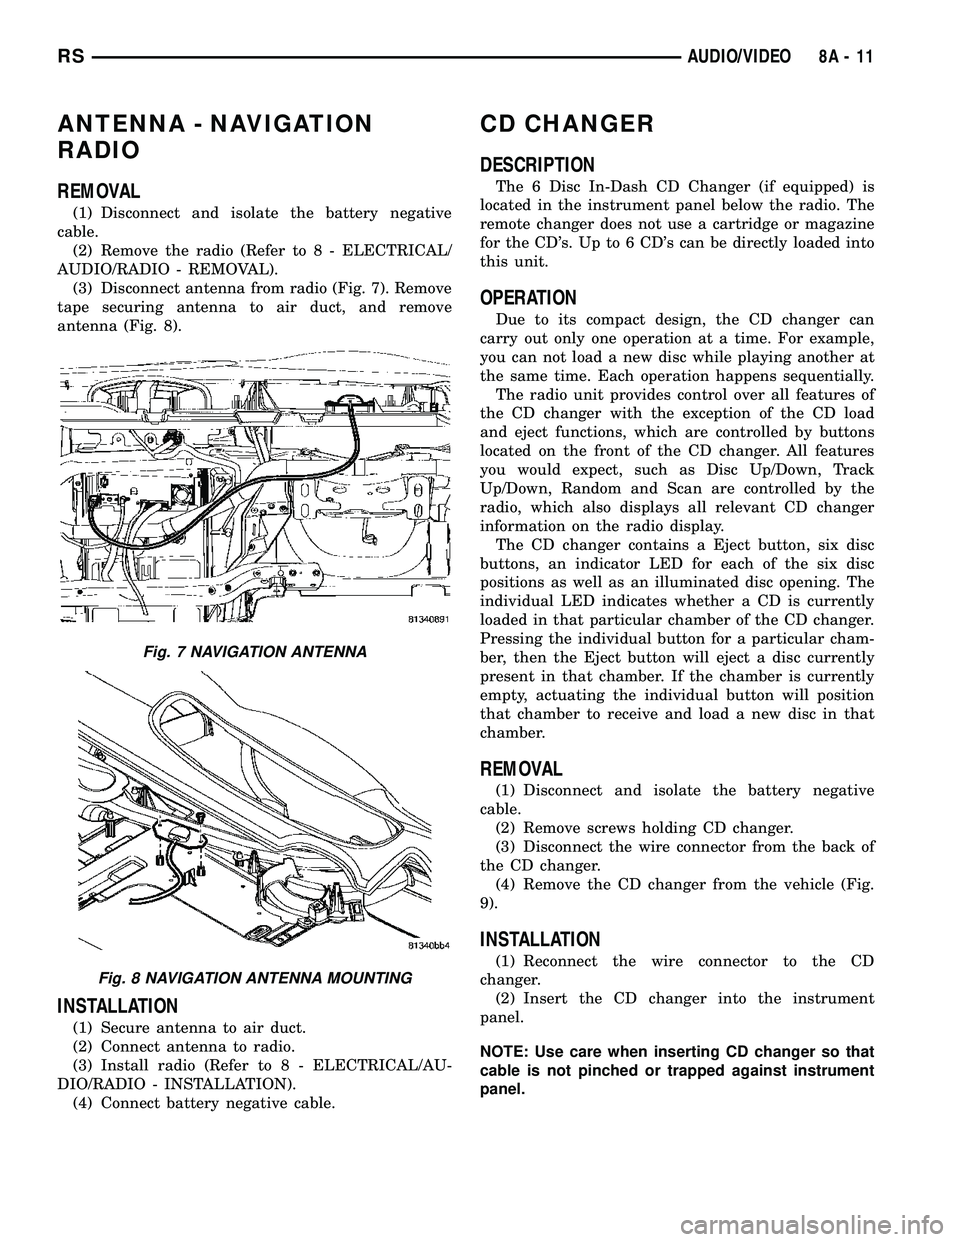 CHRYSLER CARAVAN 2005  Service Manual ANTENNA - NAVIGATION
RADIO
REMOVAL
(1) Disconnect and isolate the battery negative
cable.
(2) Remove the radio (Refer to 8 - ELECTRICAL/
AUDIO/RADIO - REMOVAL).
(3) Disconnect antenna from radio (Fig.